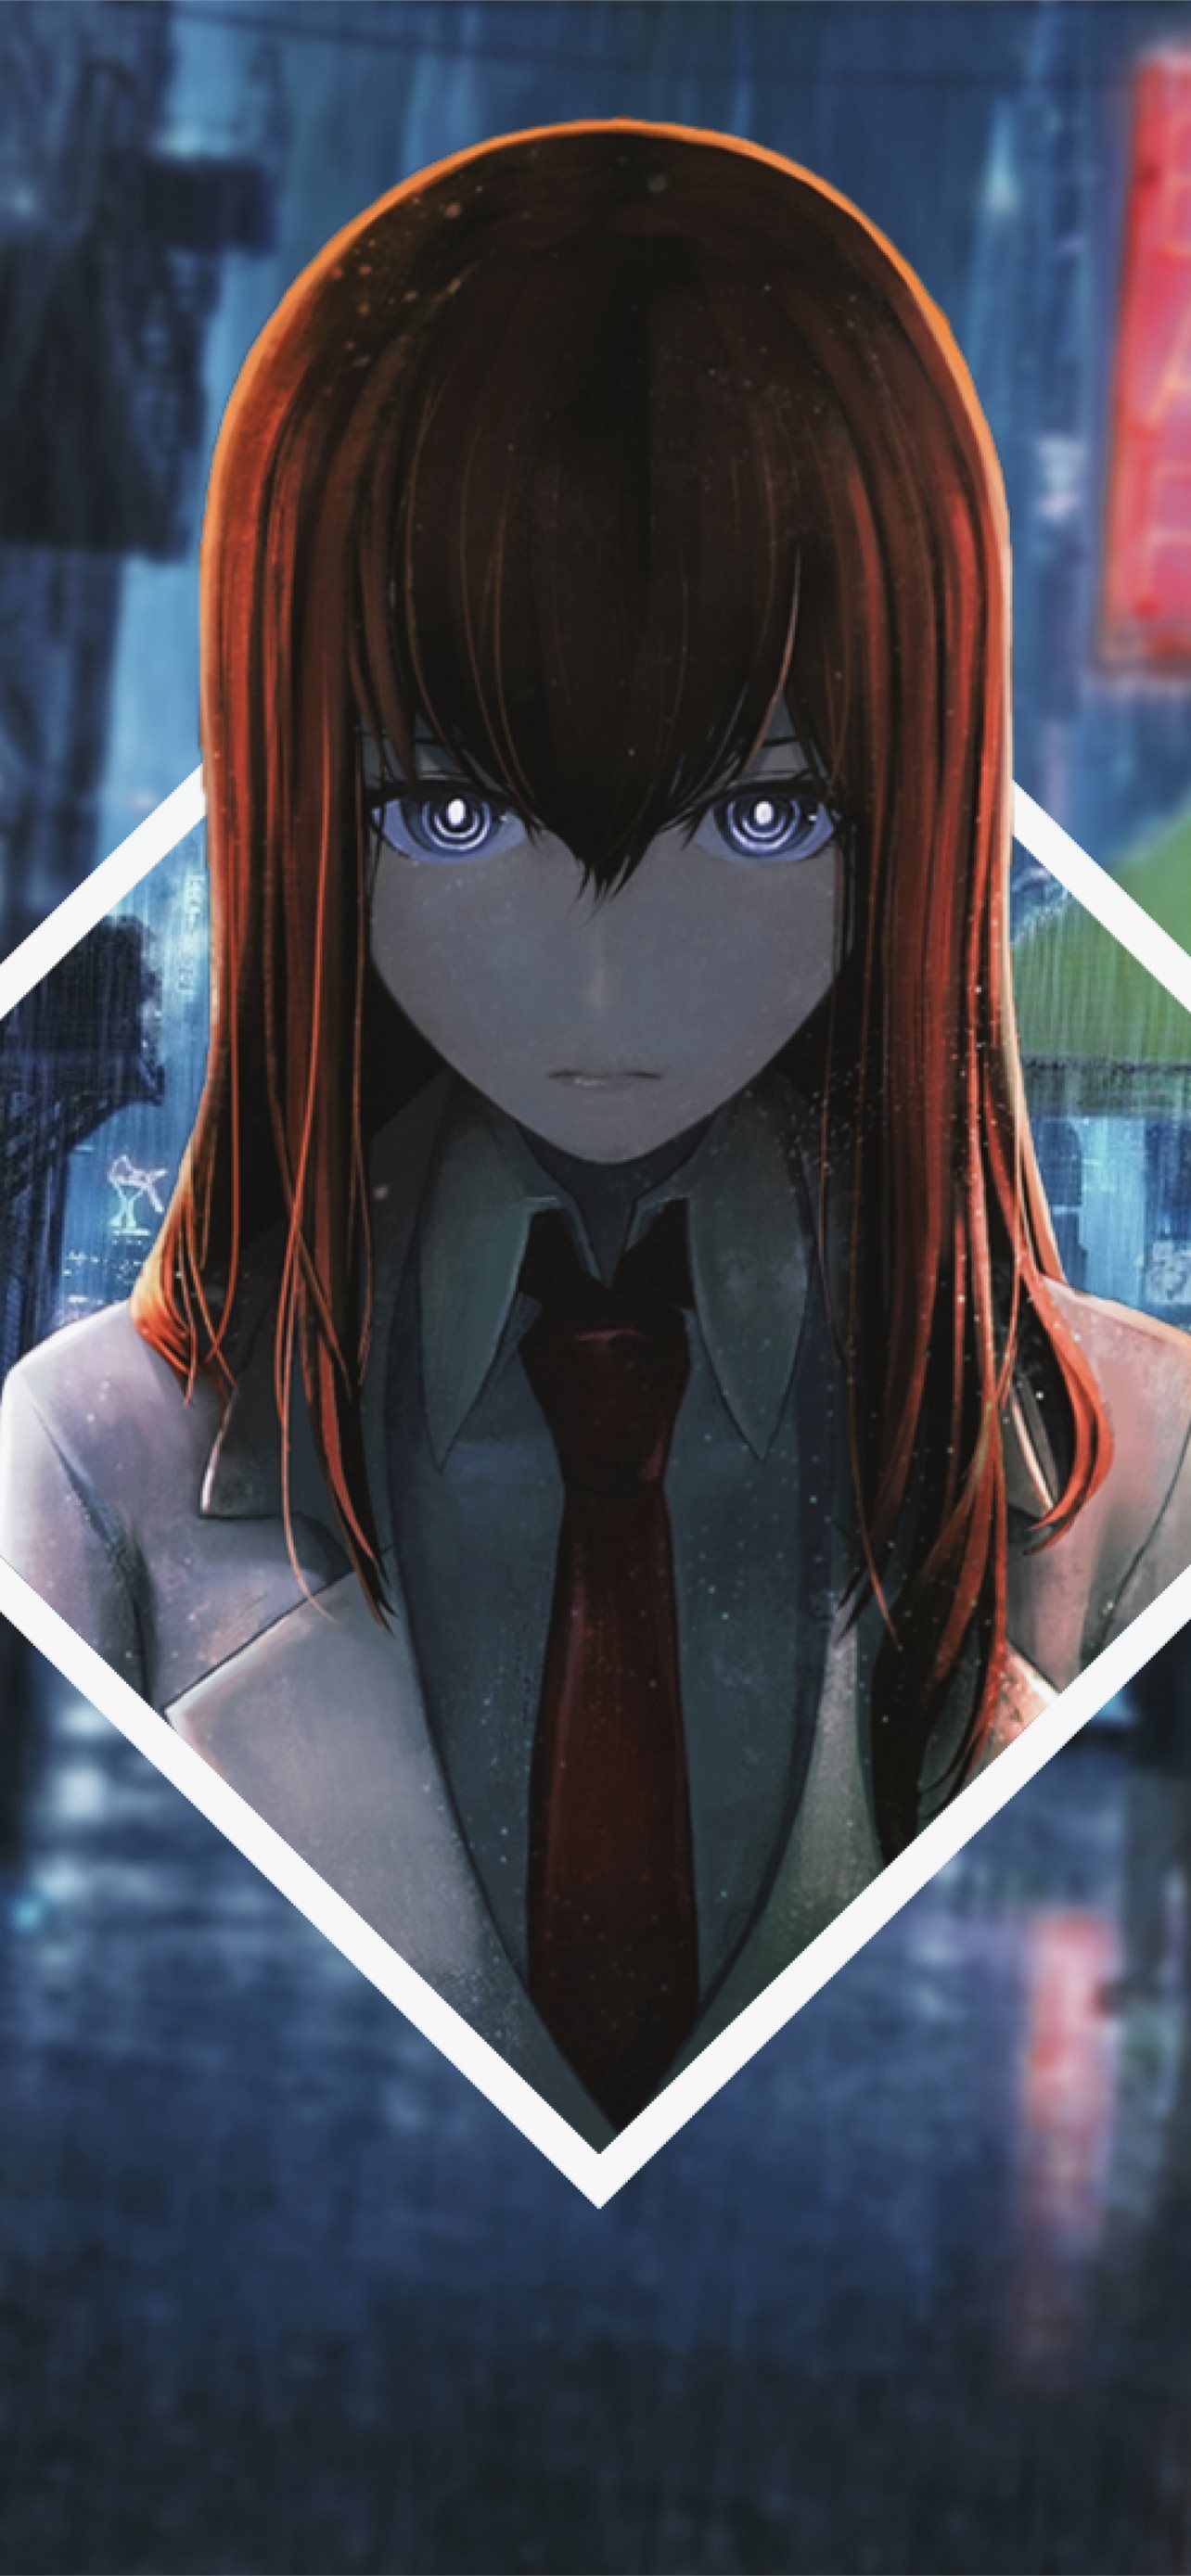 Steinsgate Iphone Wallpapers Free Download